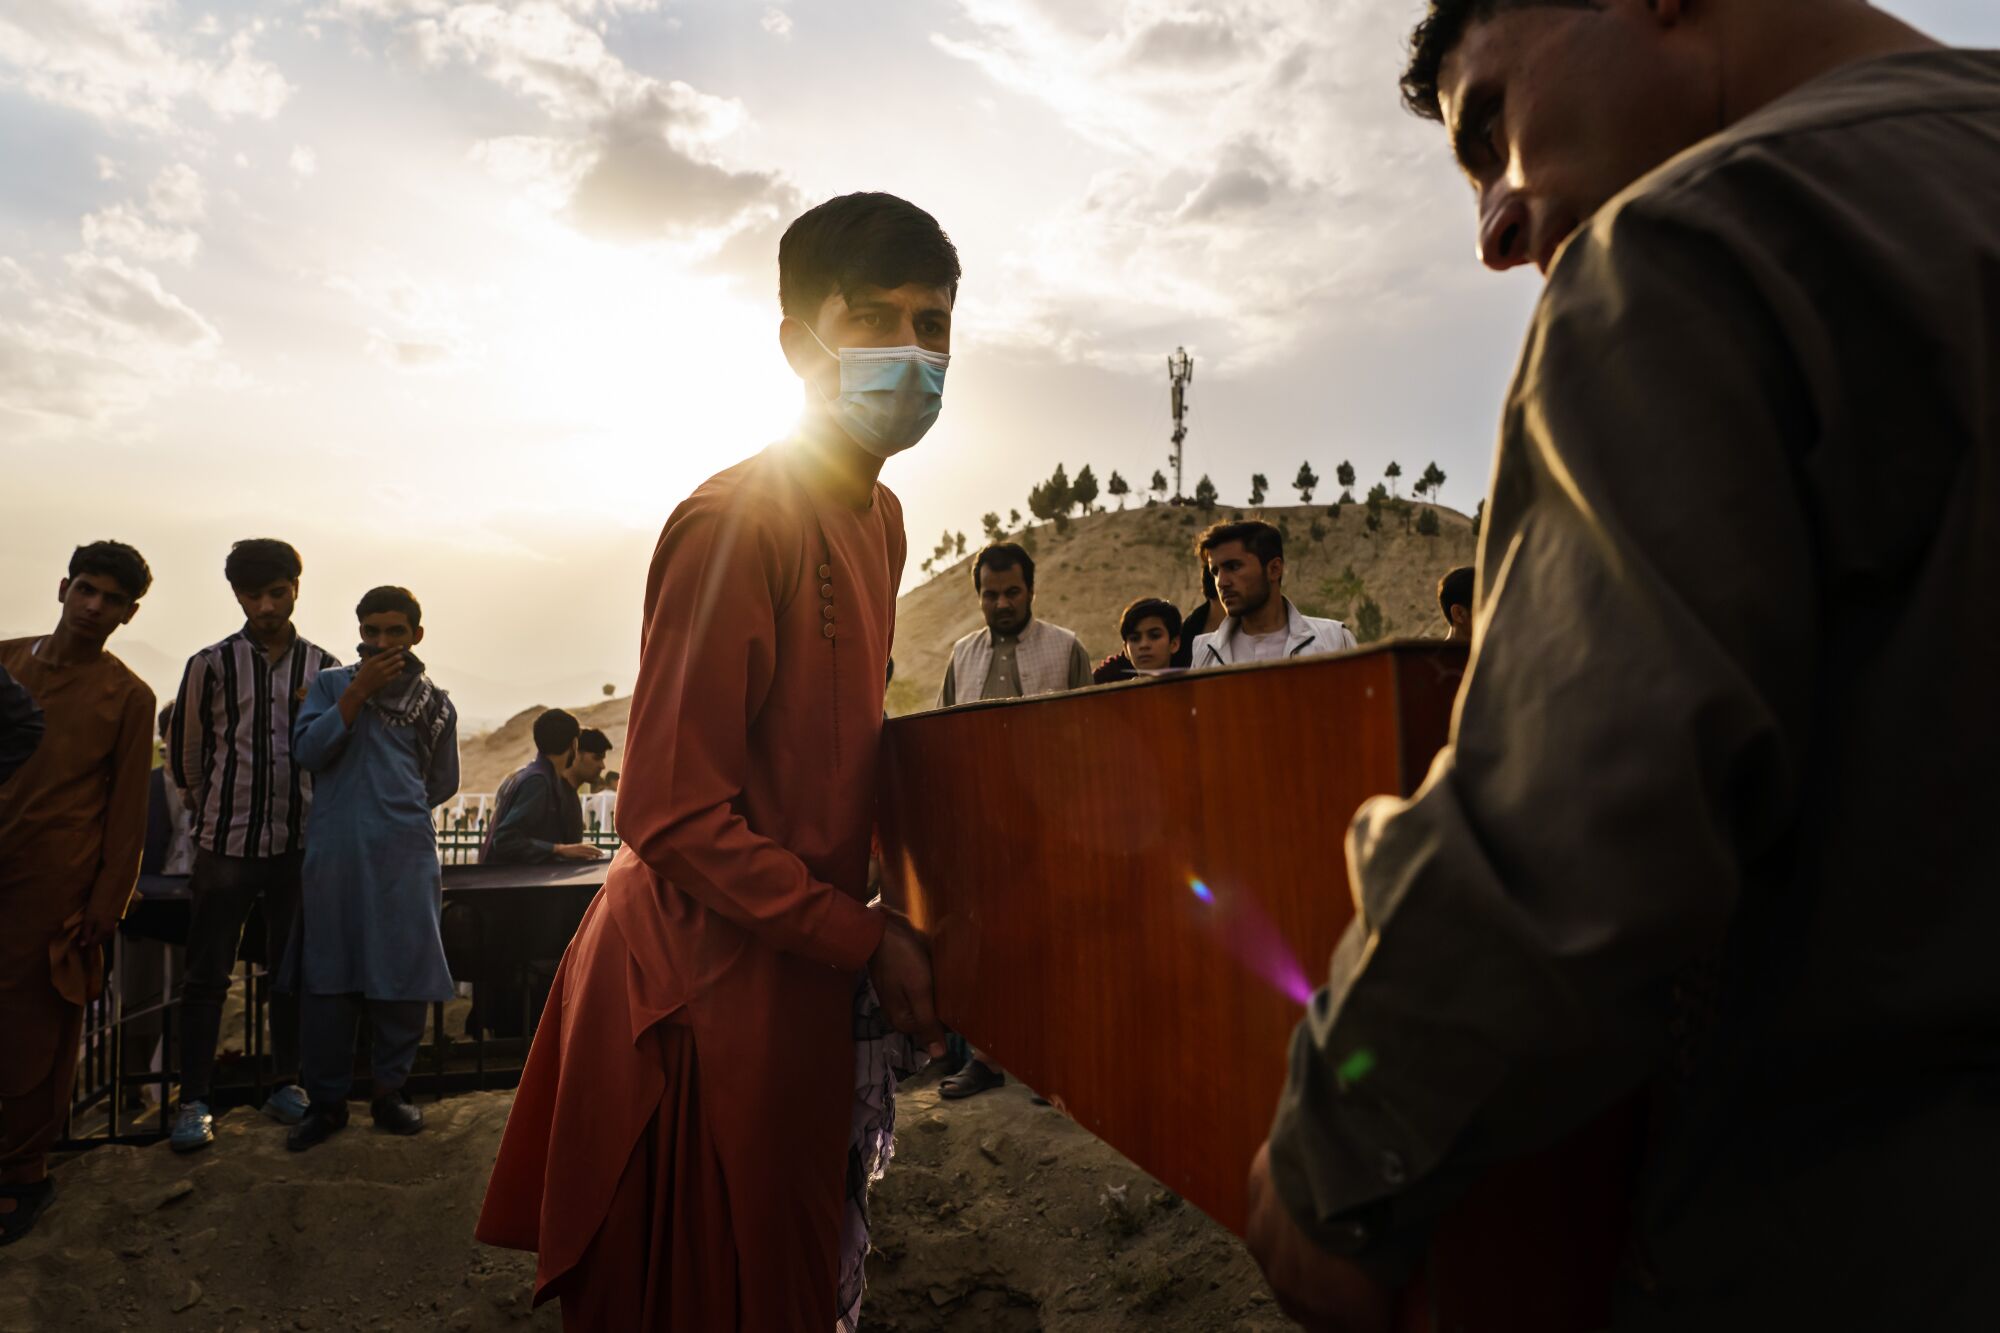 Relatives carry the caskets of the victims of Sunday's blast toward the gravesite.